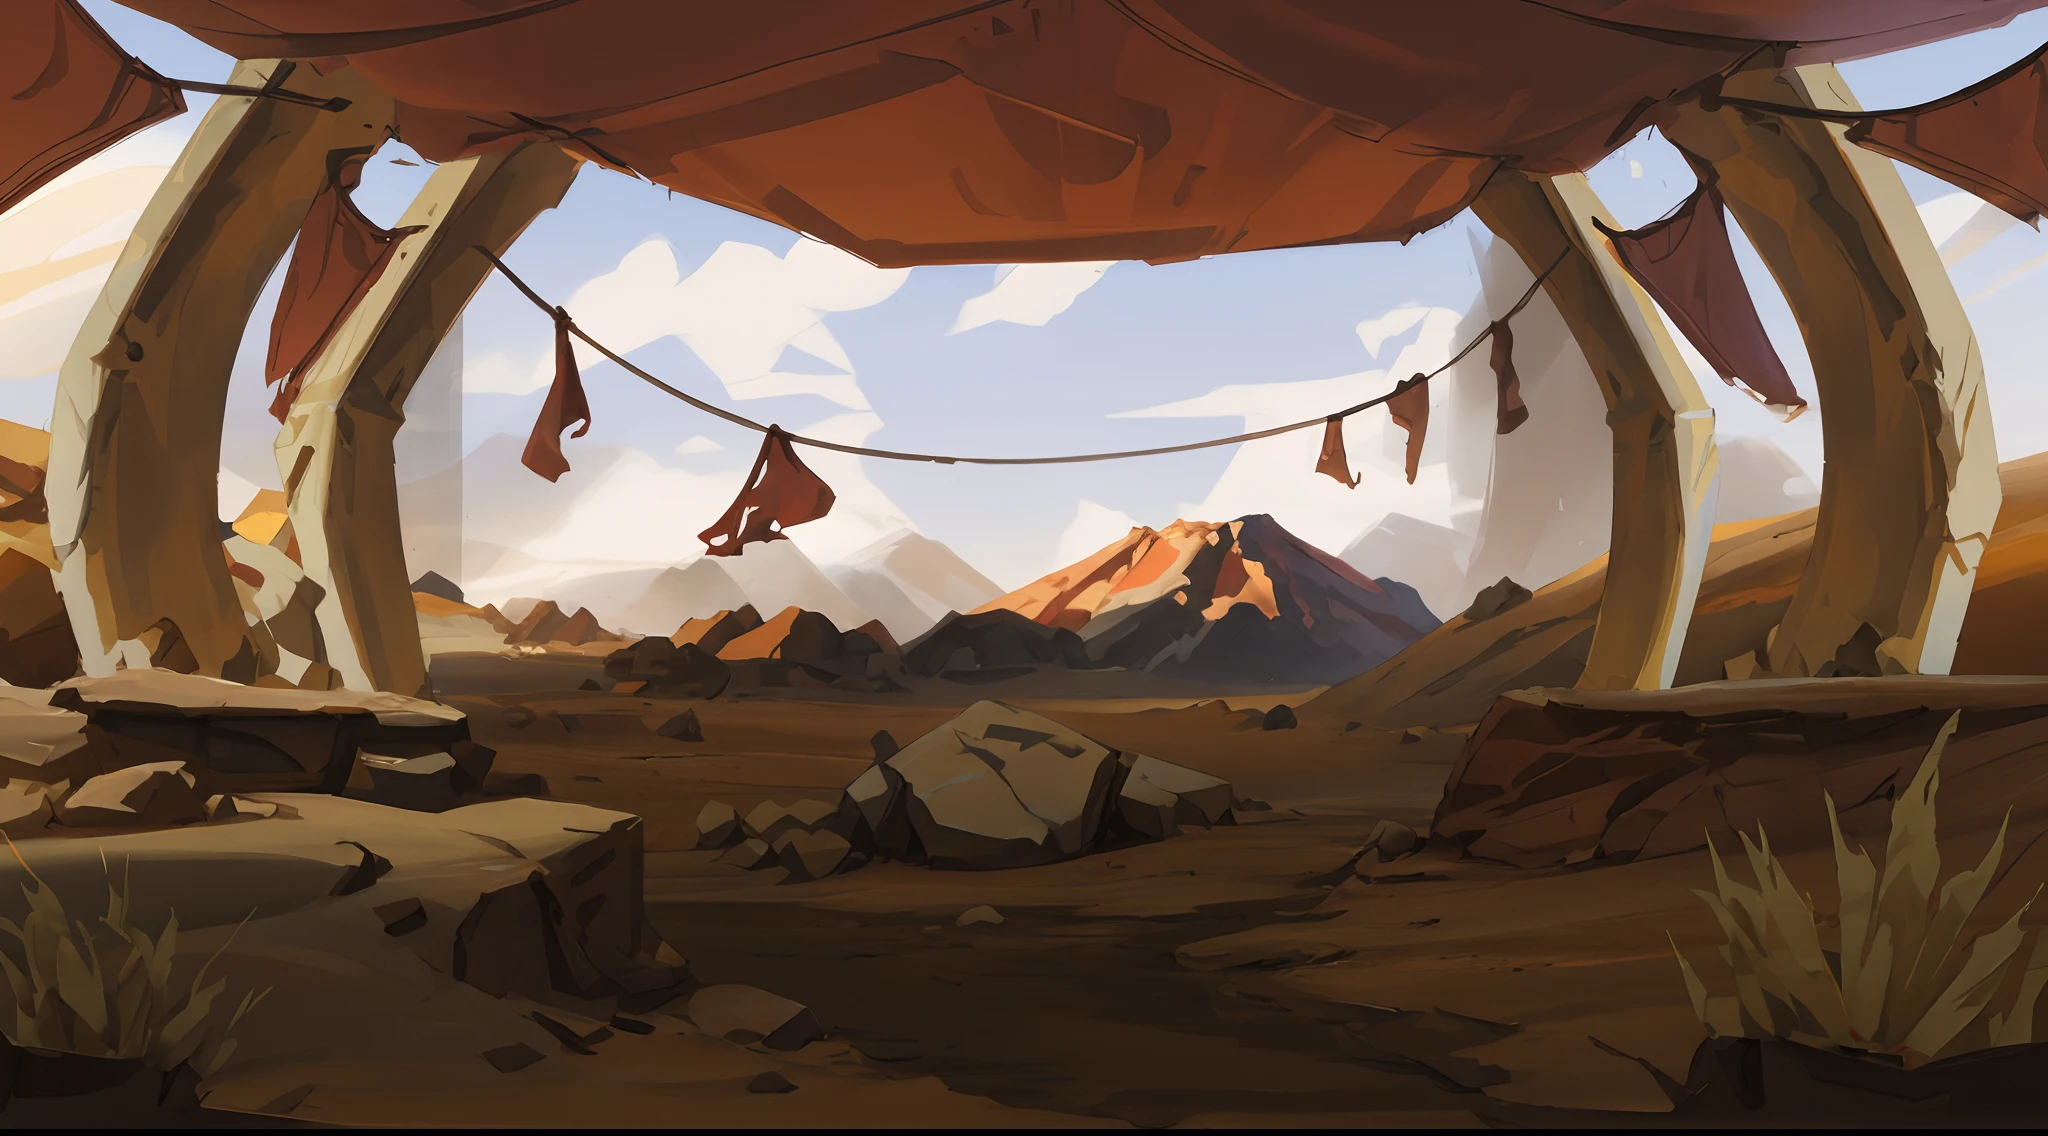 there is a drawing of a tent with a bench in the middle, ancient interior tent background, volcanic workshop background, some mountains in the background, concept art for a video game, desert environment, background art, desert setting, steampunk desert background, concept art!, dusty environment, painted as a game concept art, desert in the background, scenery game concept art, indie concept art